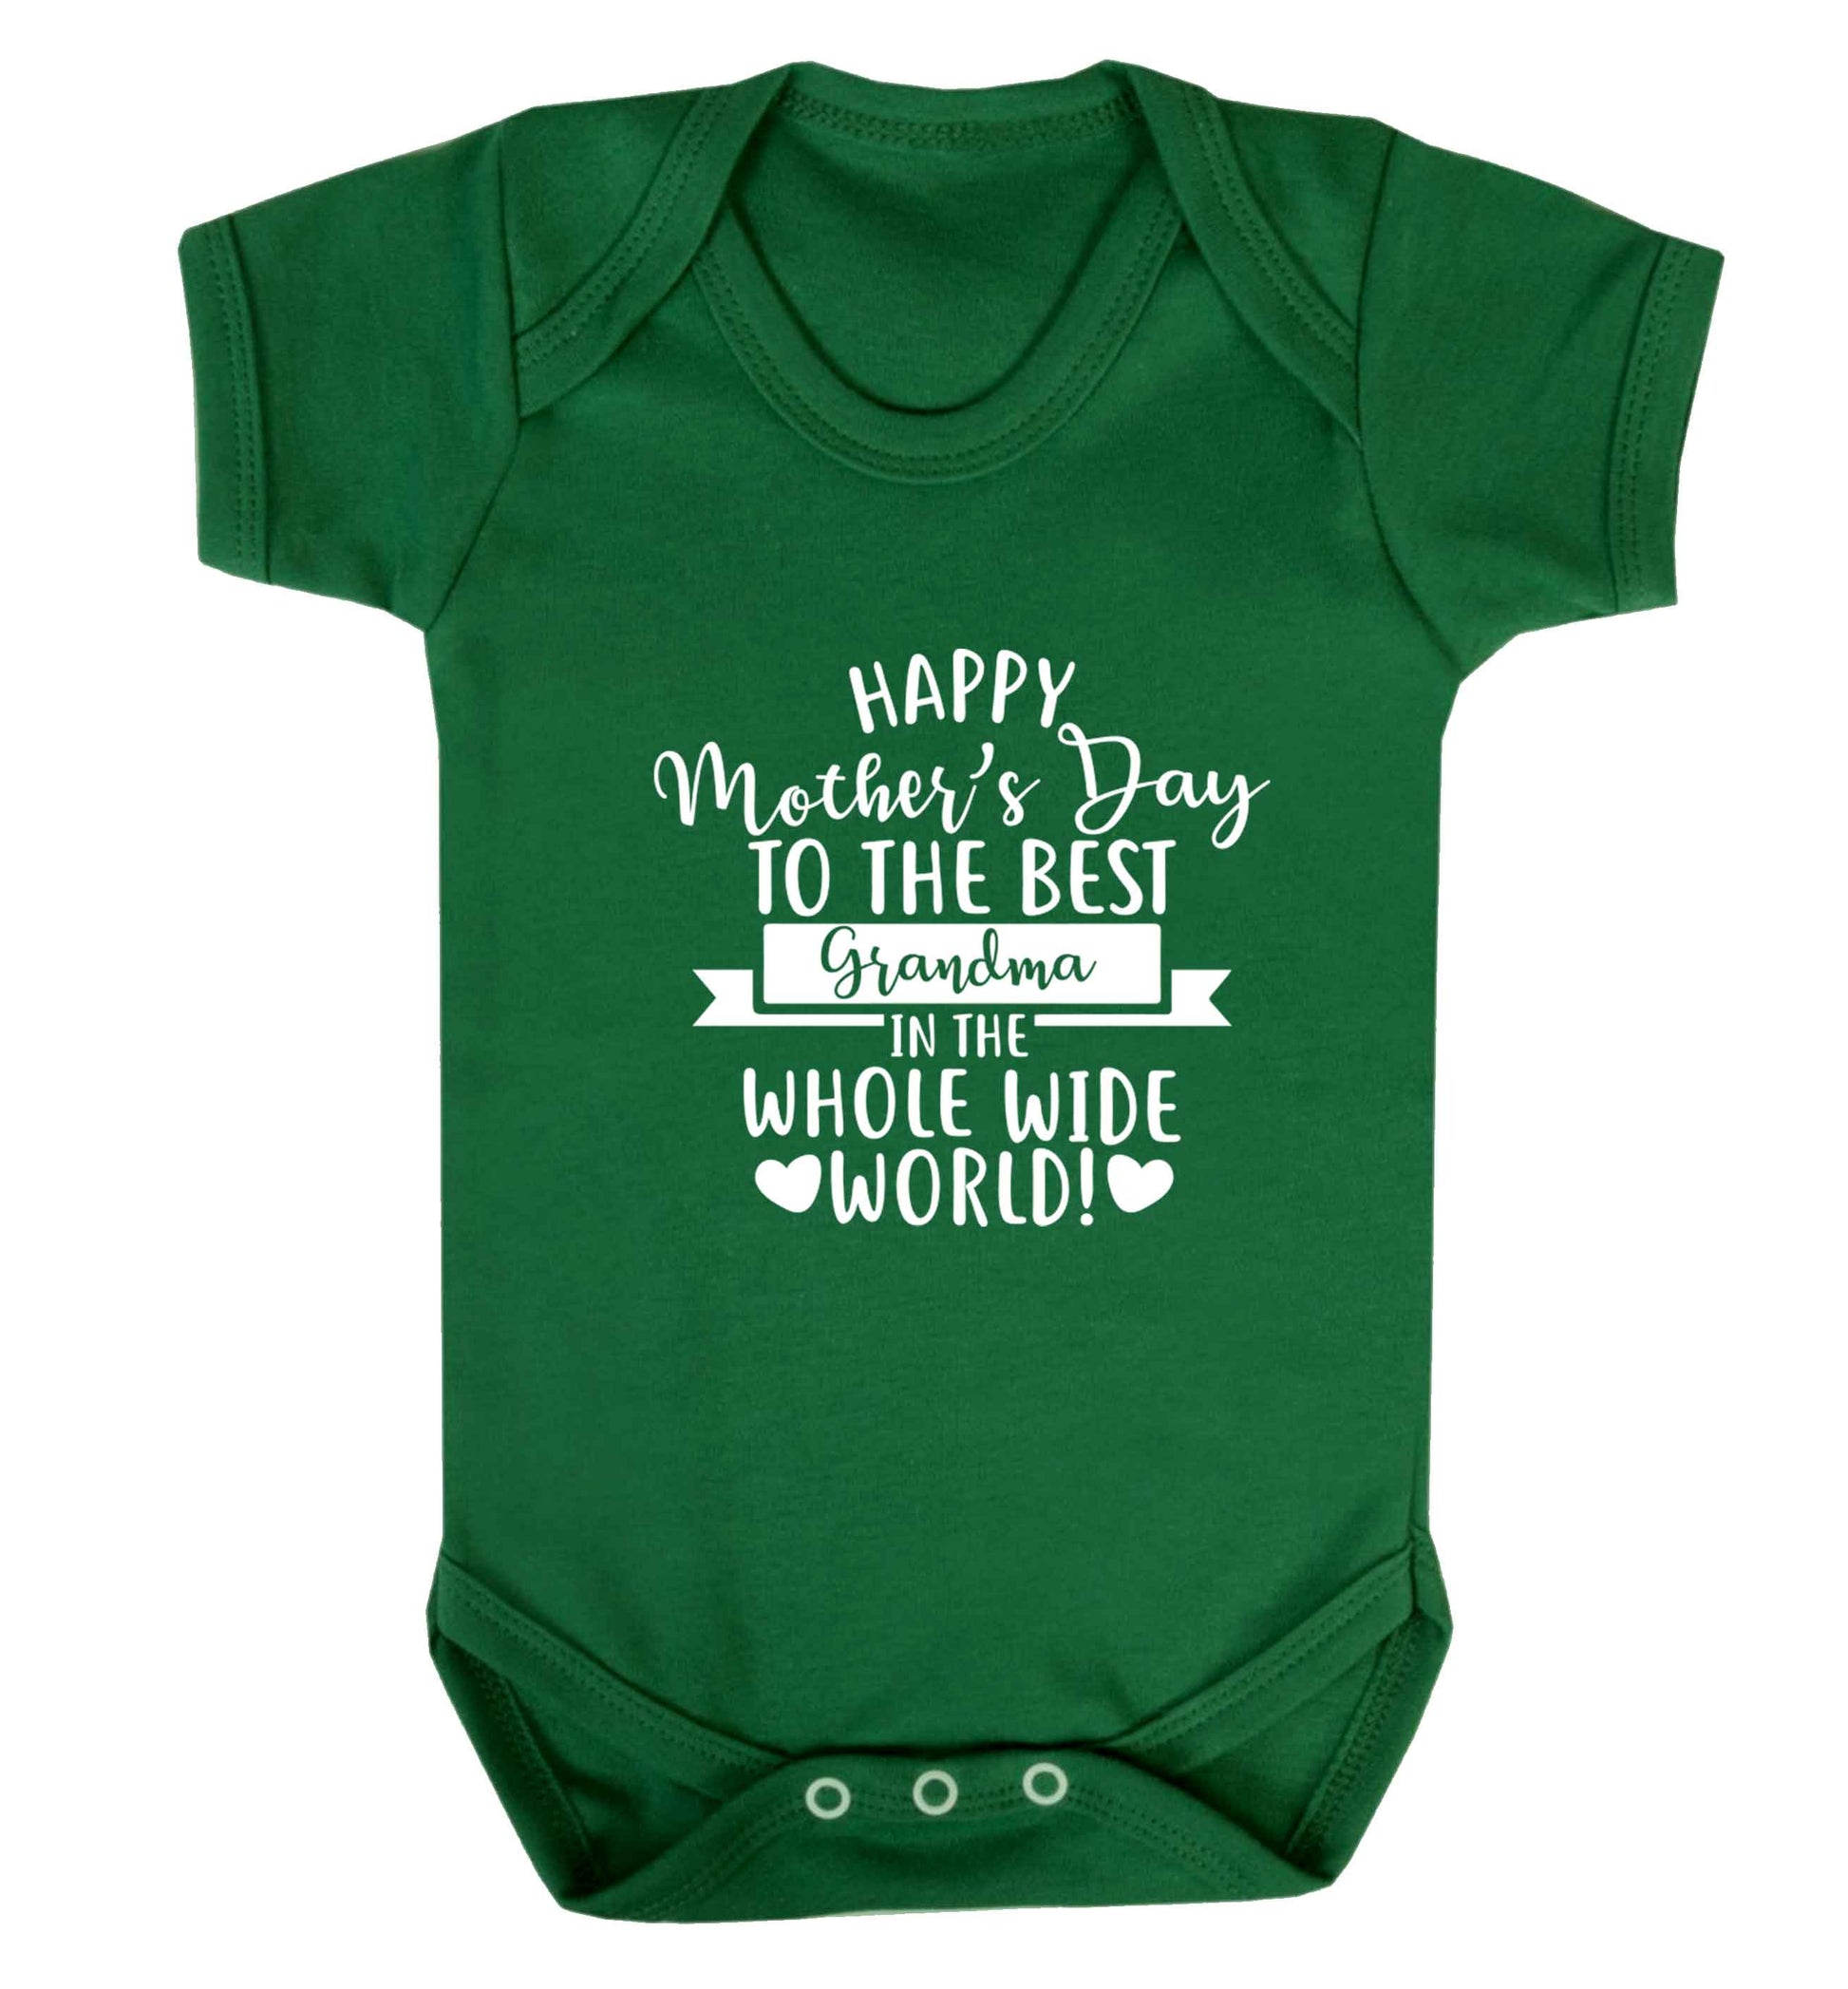 Happy mother's day to the best grandma in the world baby vest green 18-24 months